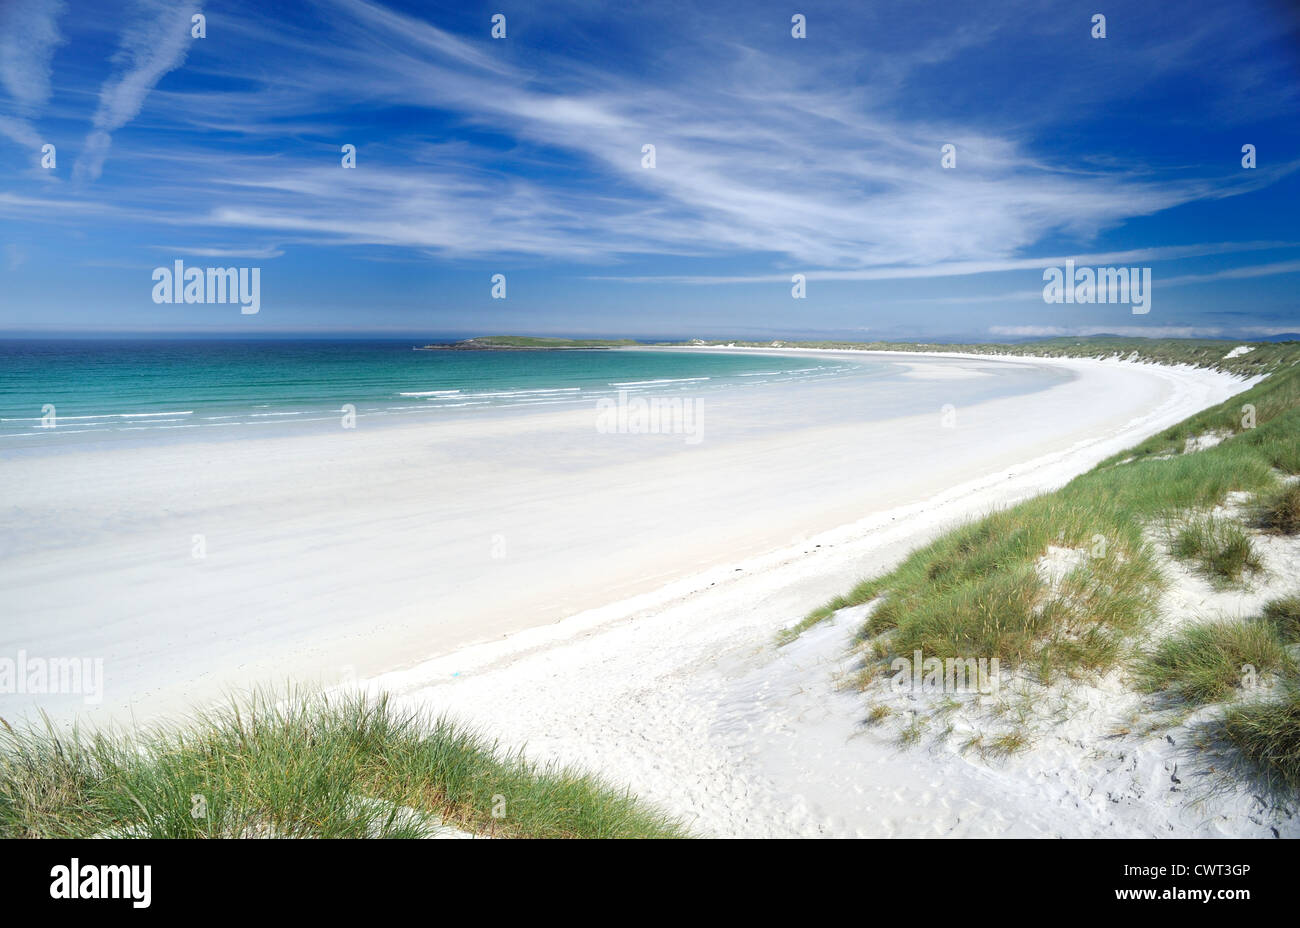 Blue sea framed in a curved white sandy beach Stock Photo